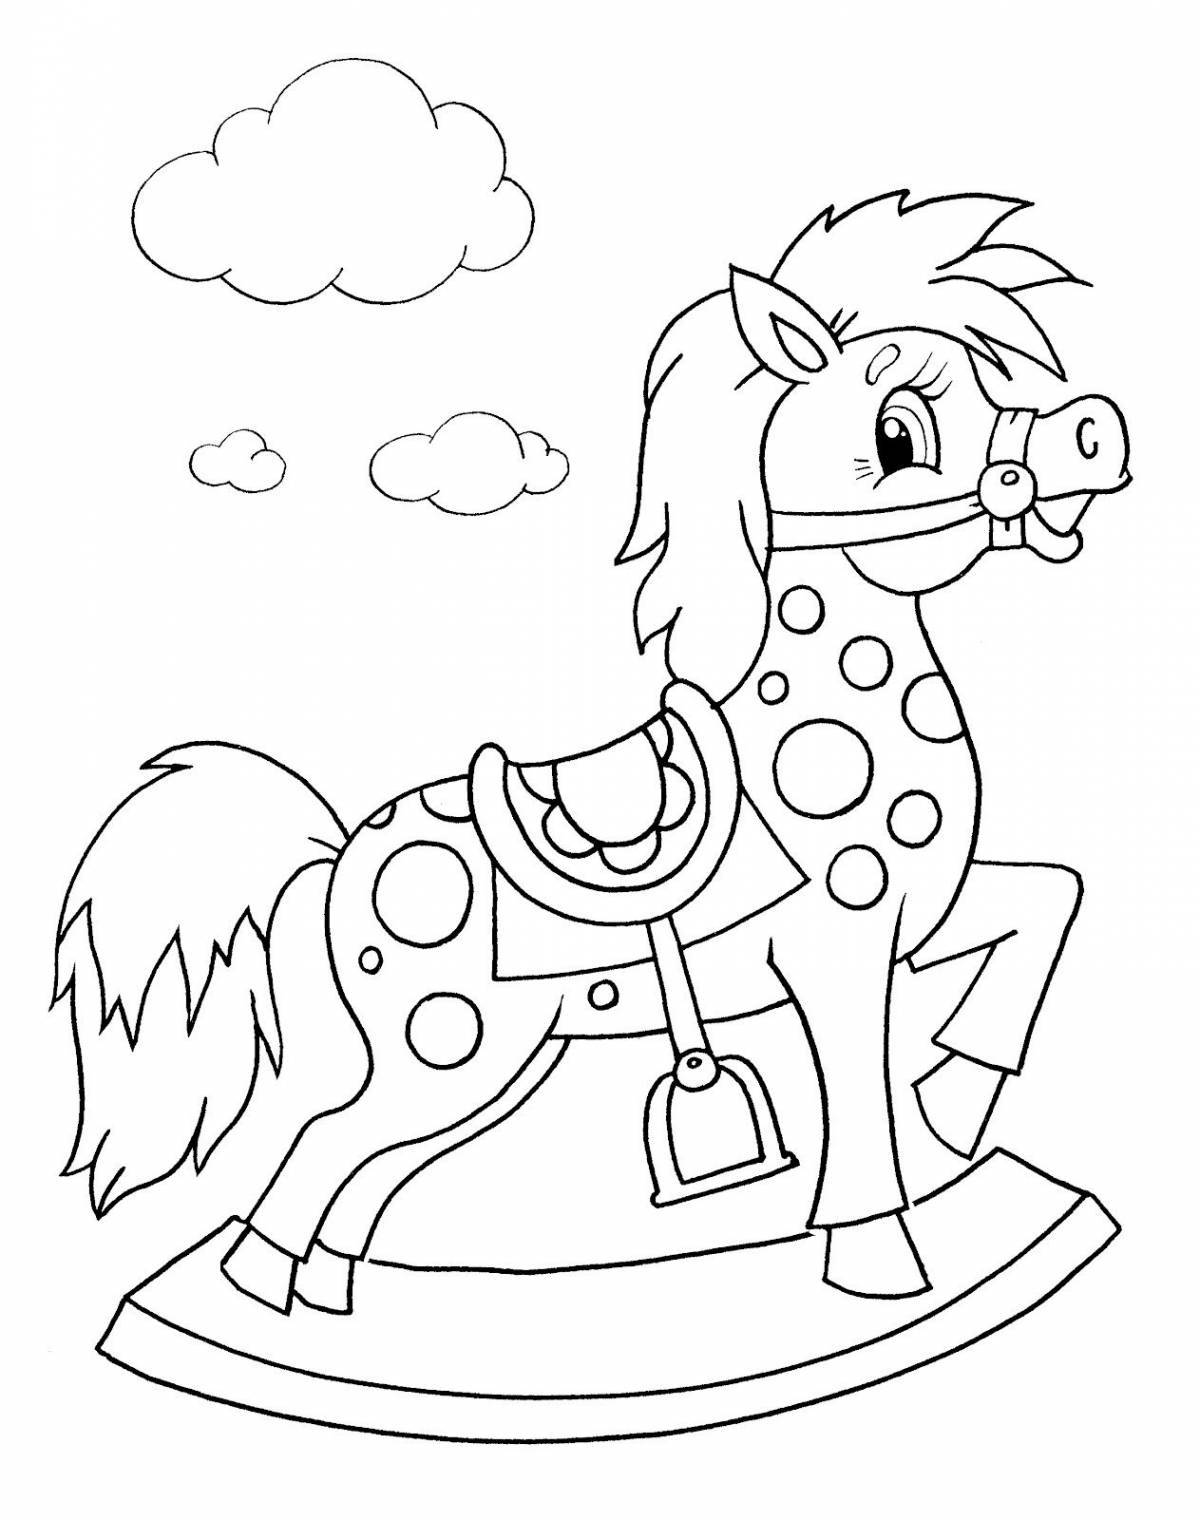 Creative printable coloring book for kids